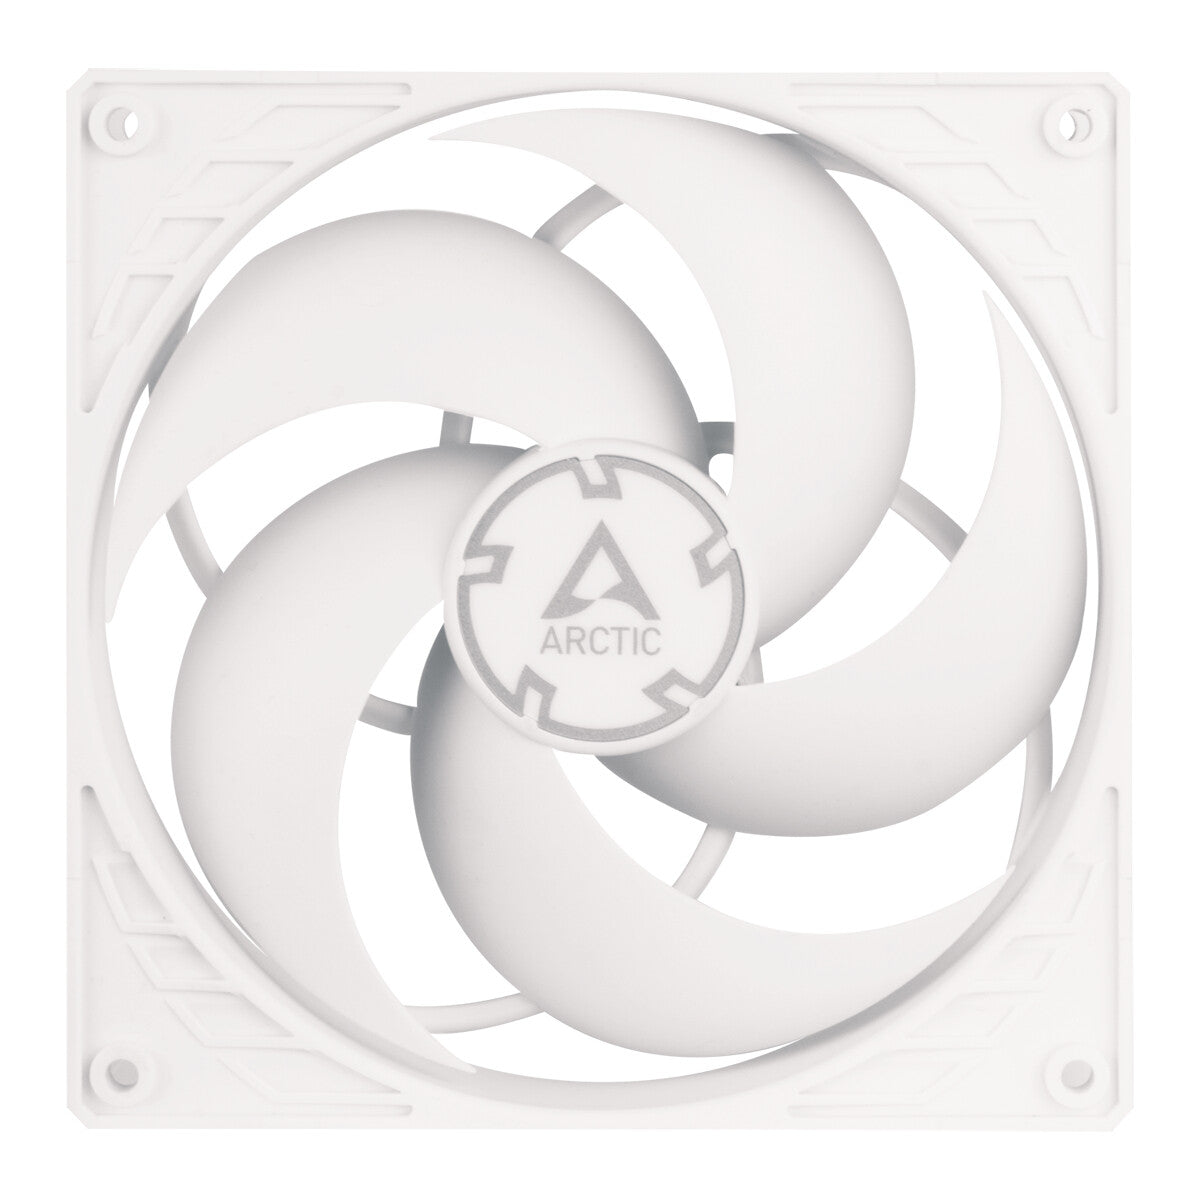 ARCTIC P14 PWM PST - Computer Case Fan in White - 140mm